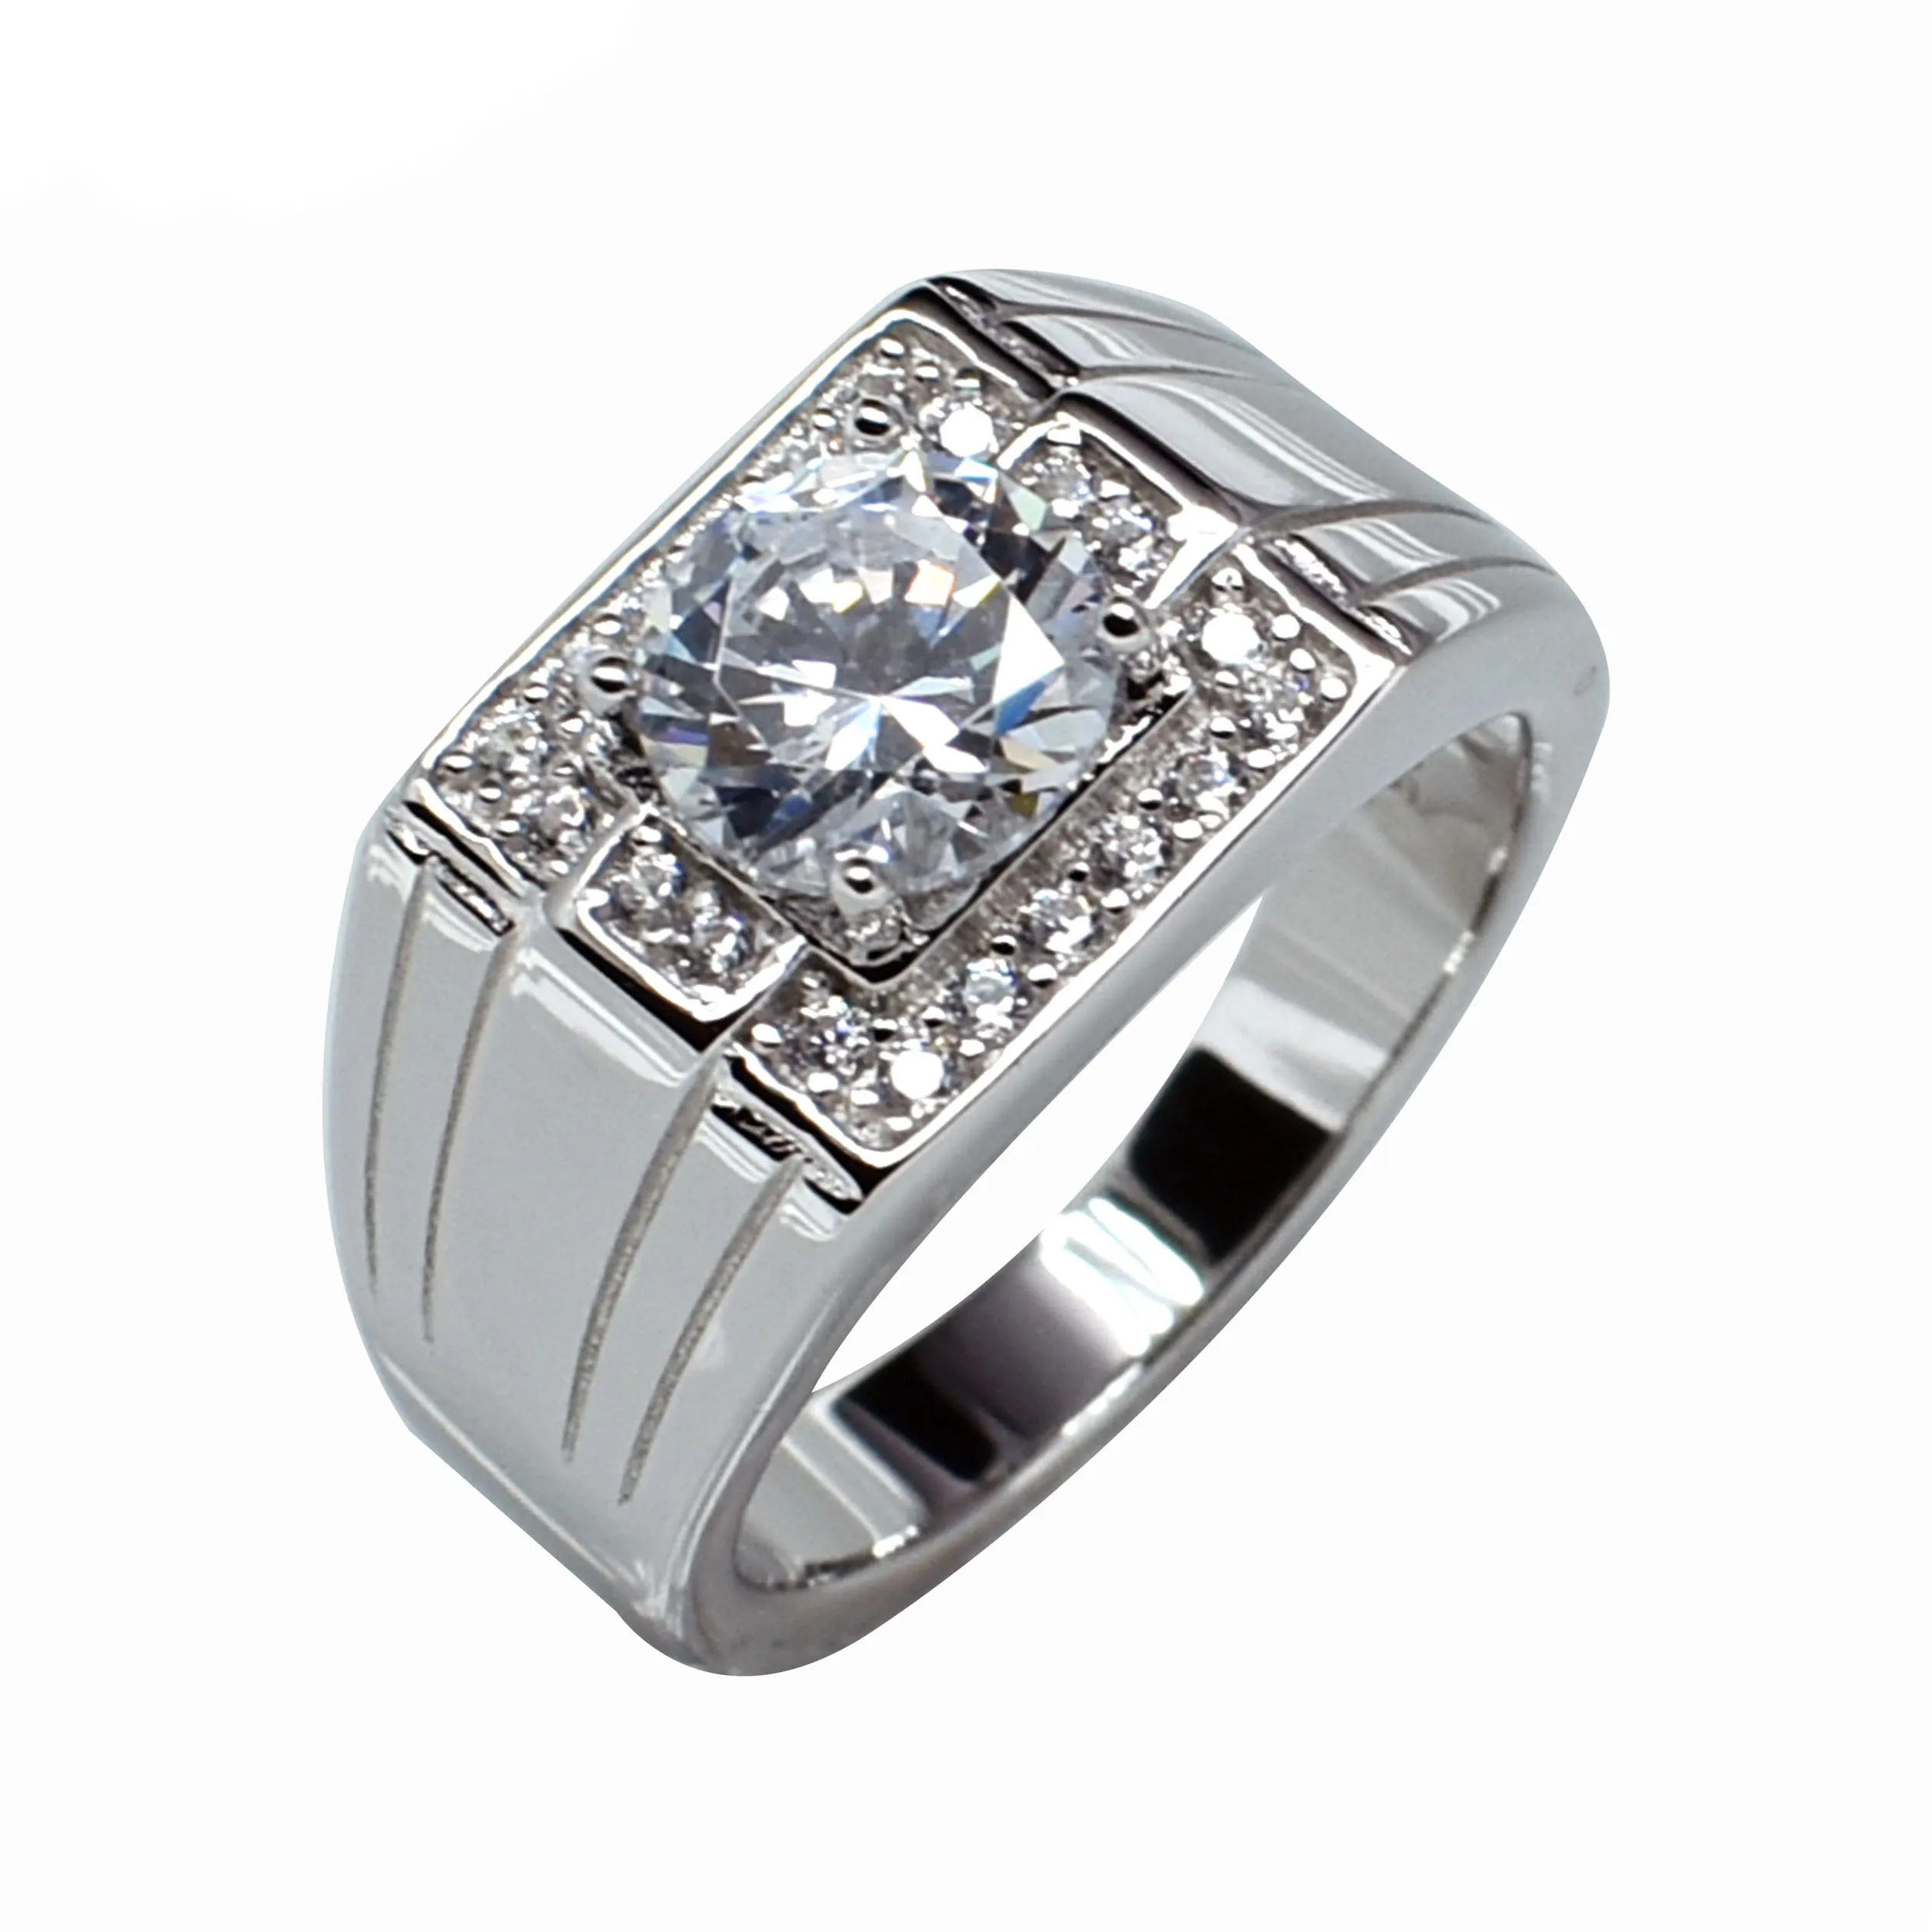 PRENOTCHED 12MM ROUND SOLITAIRE RING .925 STERLING SILVER SIZES 5-9 CR284SS